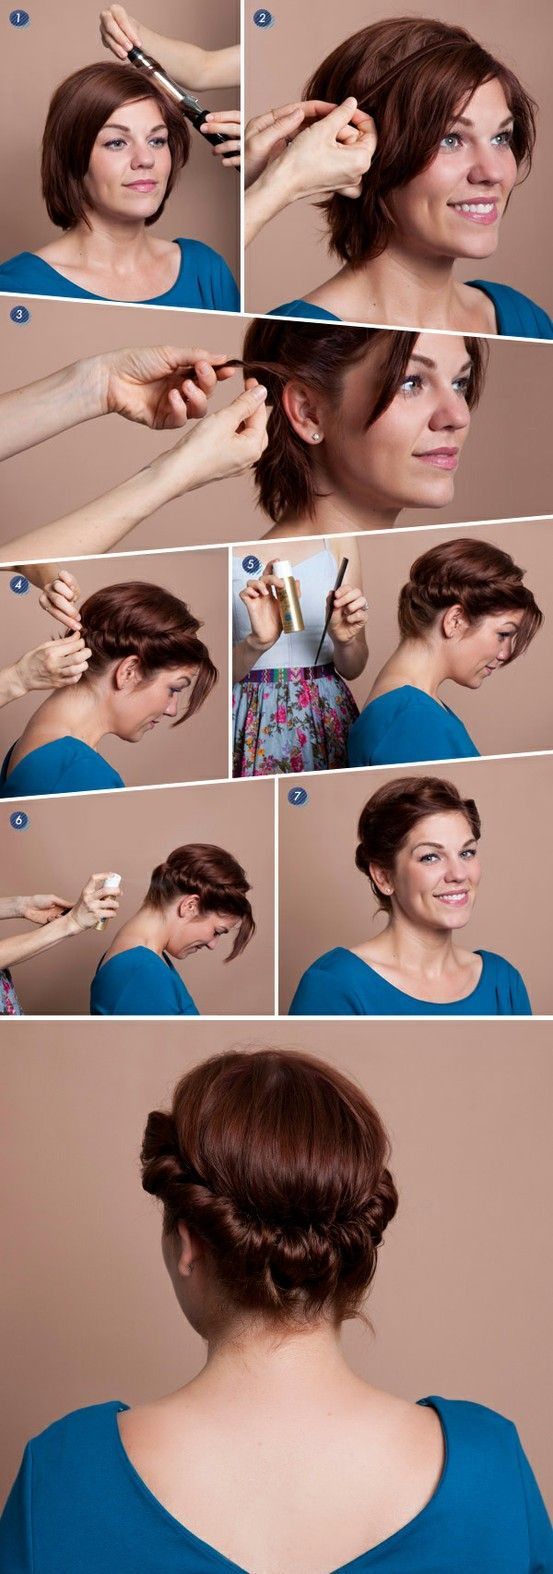 this is a how-to for people like me with very short hair. its really effective and can be configured however you like